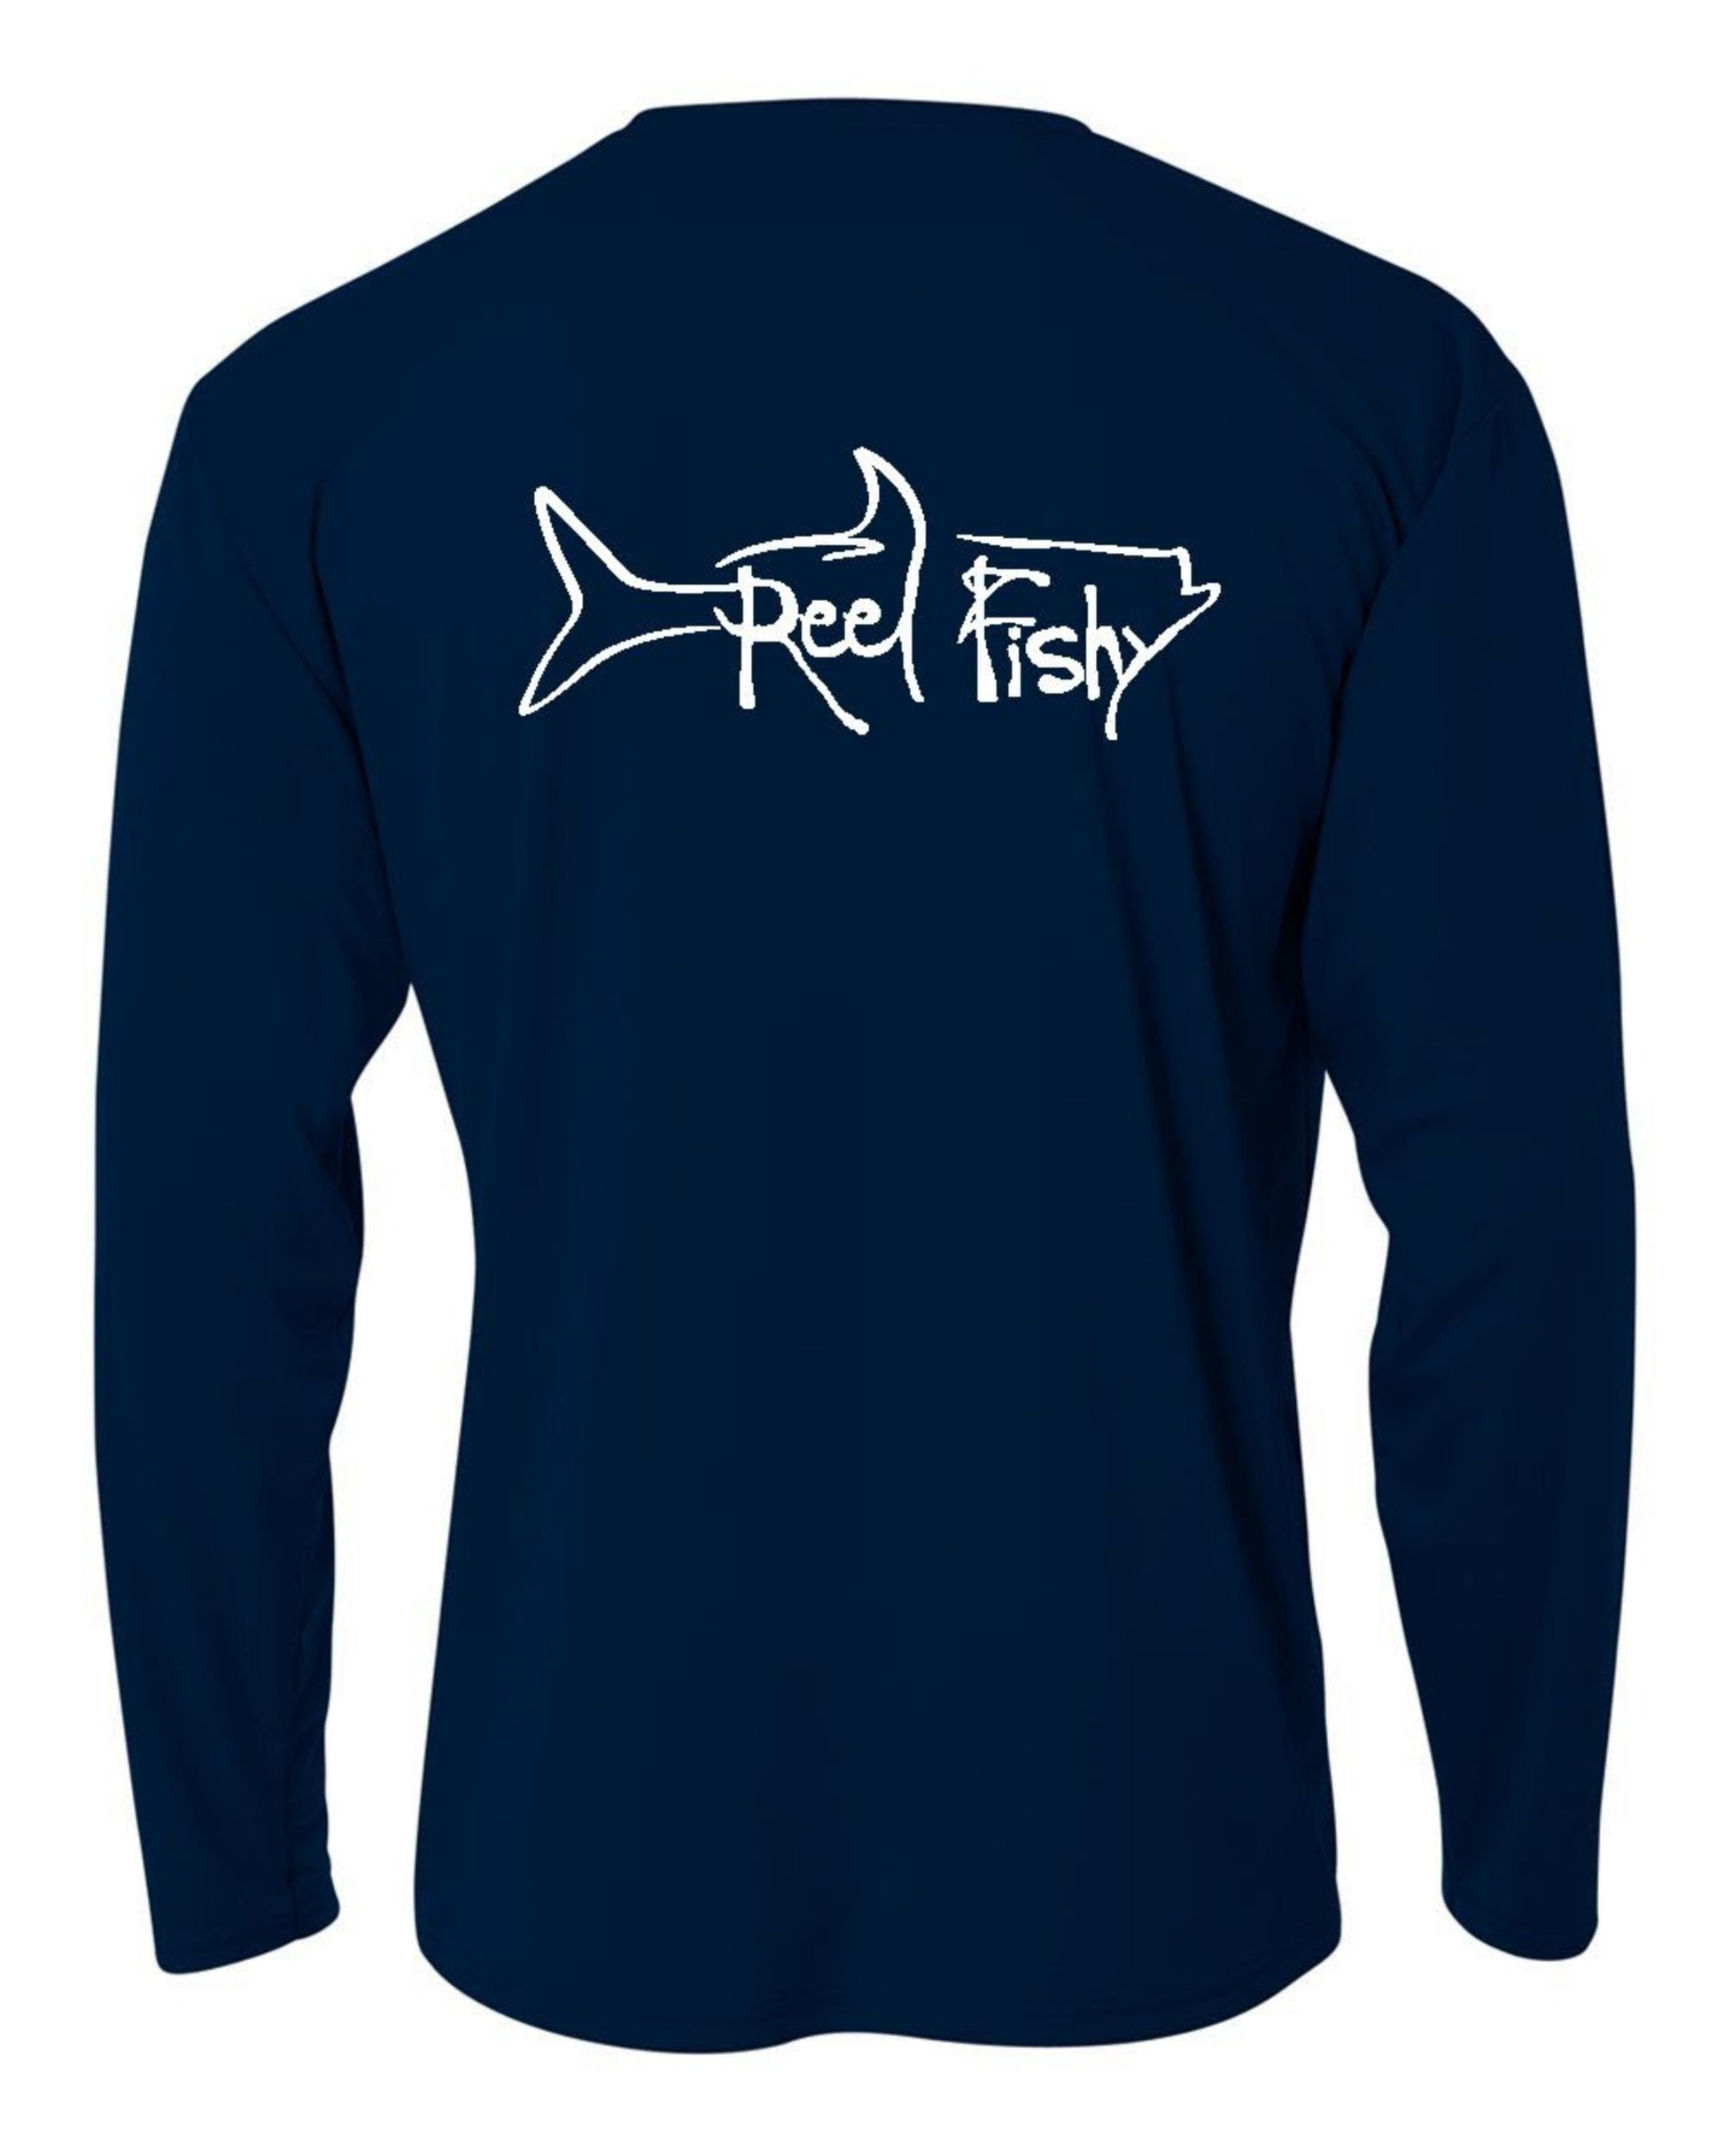 Youth Performance Dry-Fit Tarpon Fishing Shirts with Sun Protection by Reel Fishy Apparel - Long Sleeve Navy